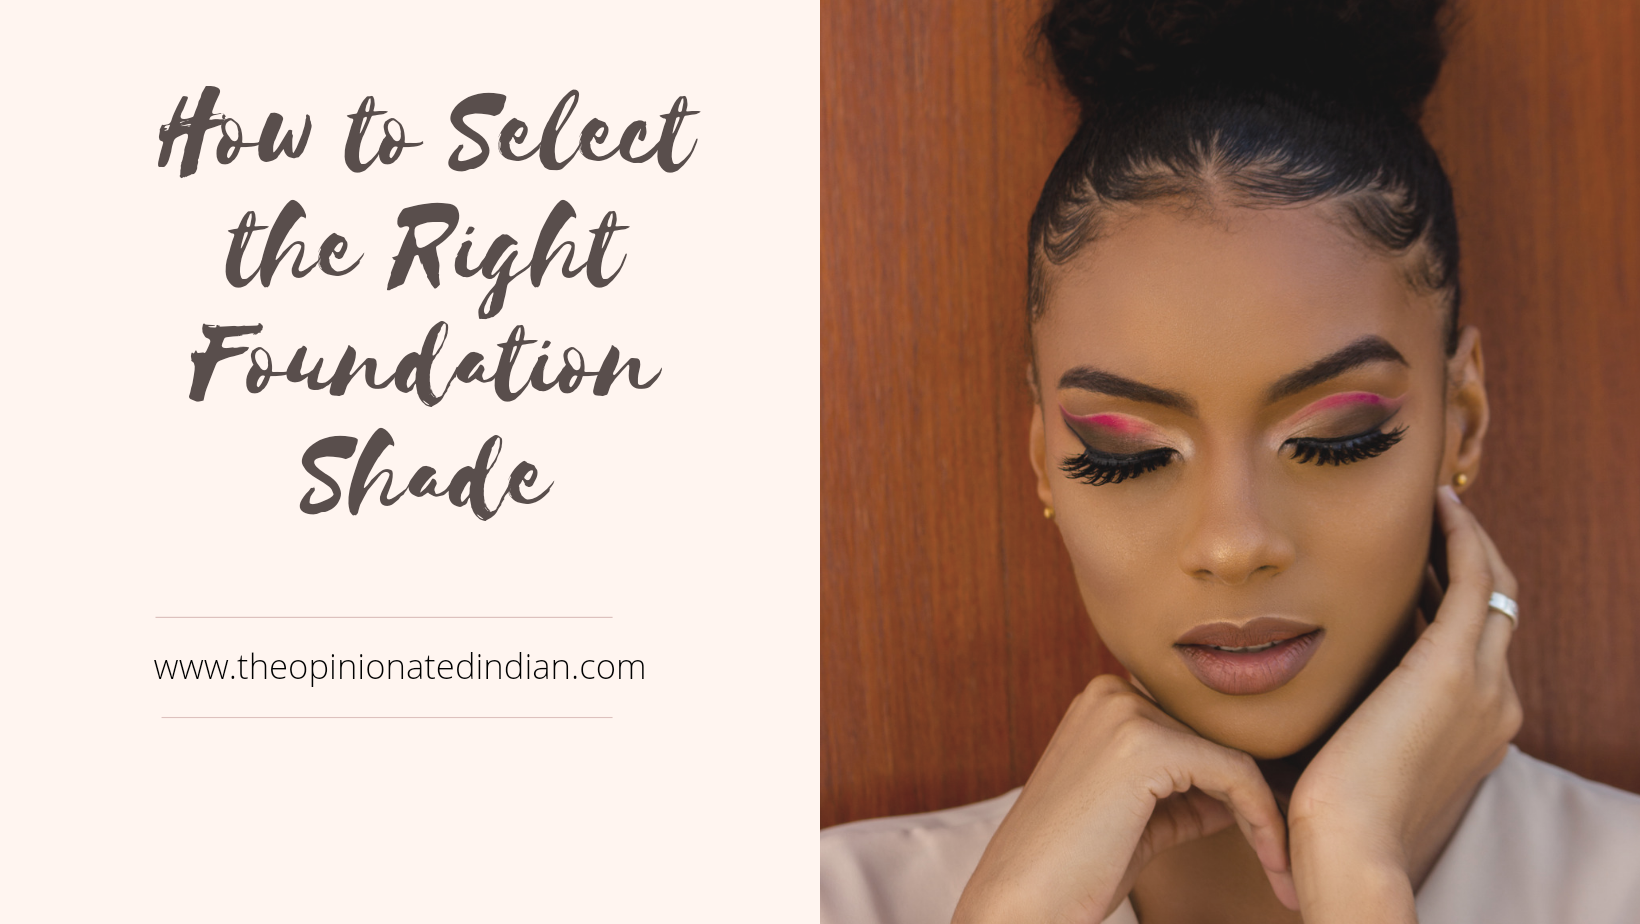 How to Select the Right Foundation Shade?